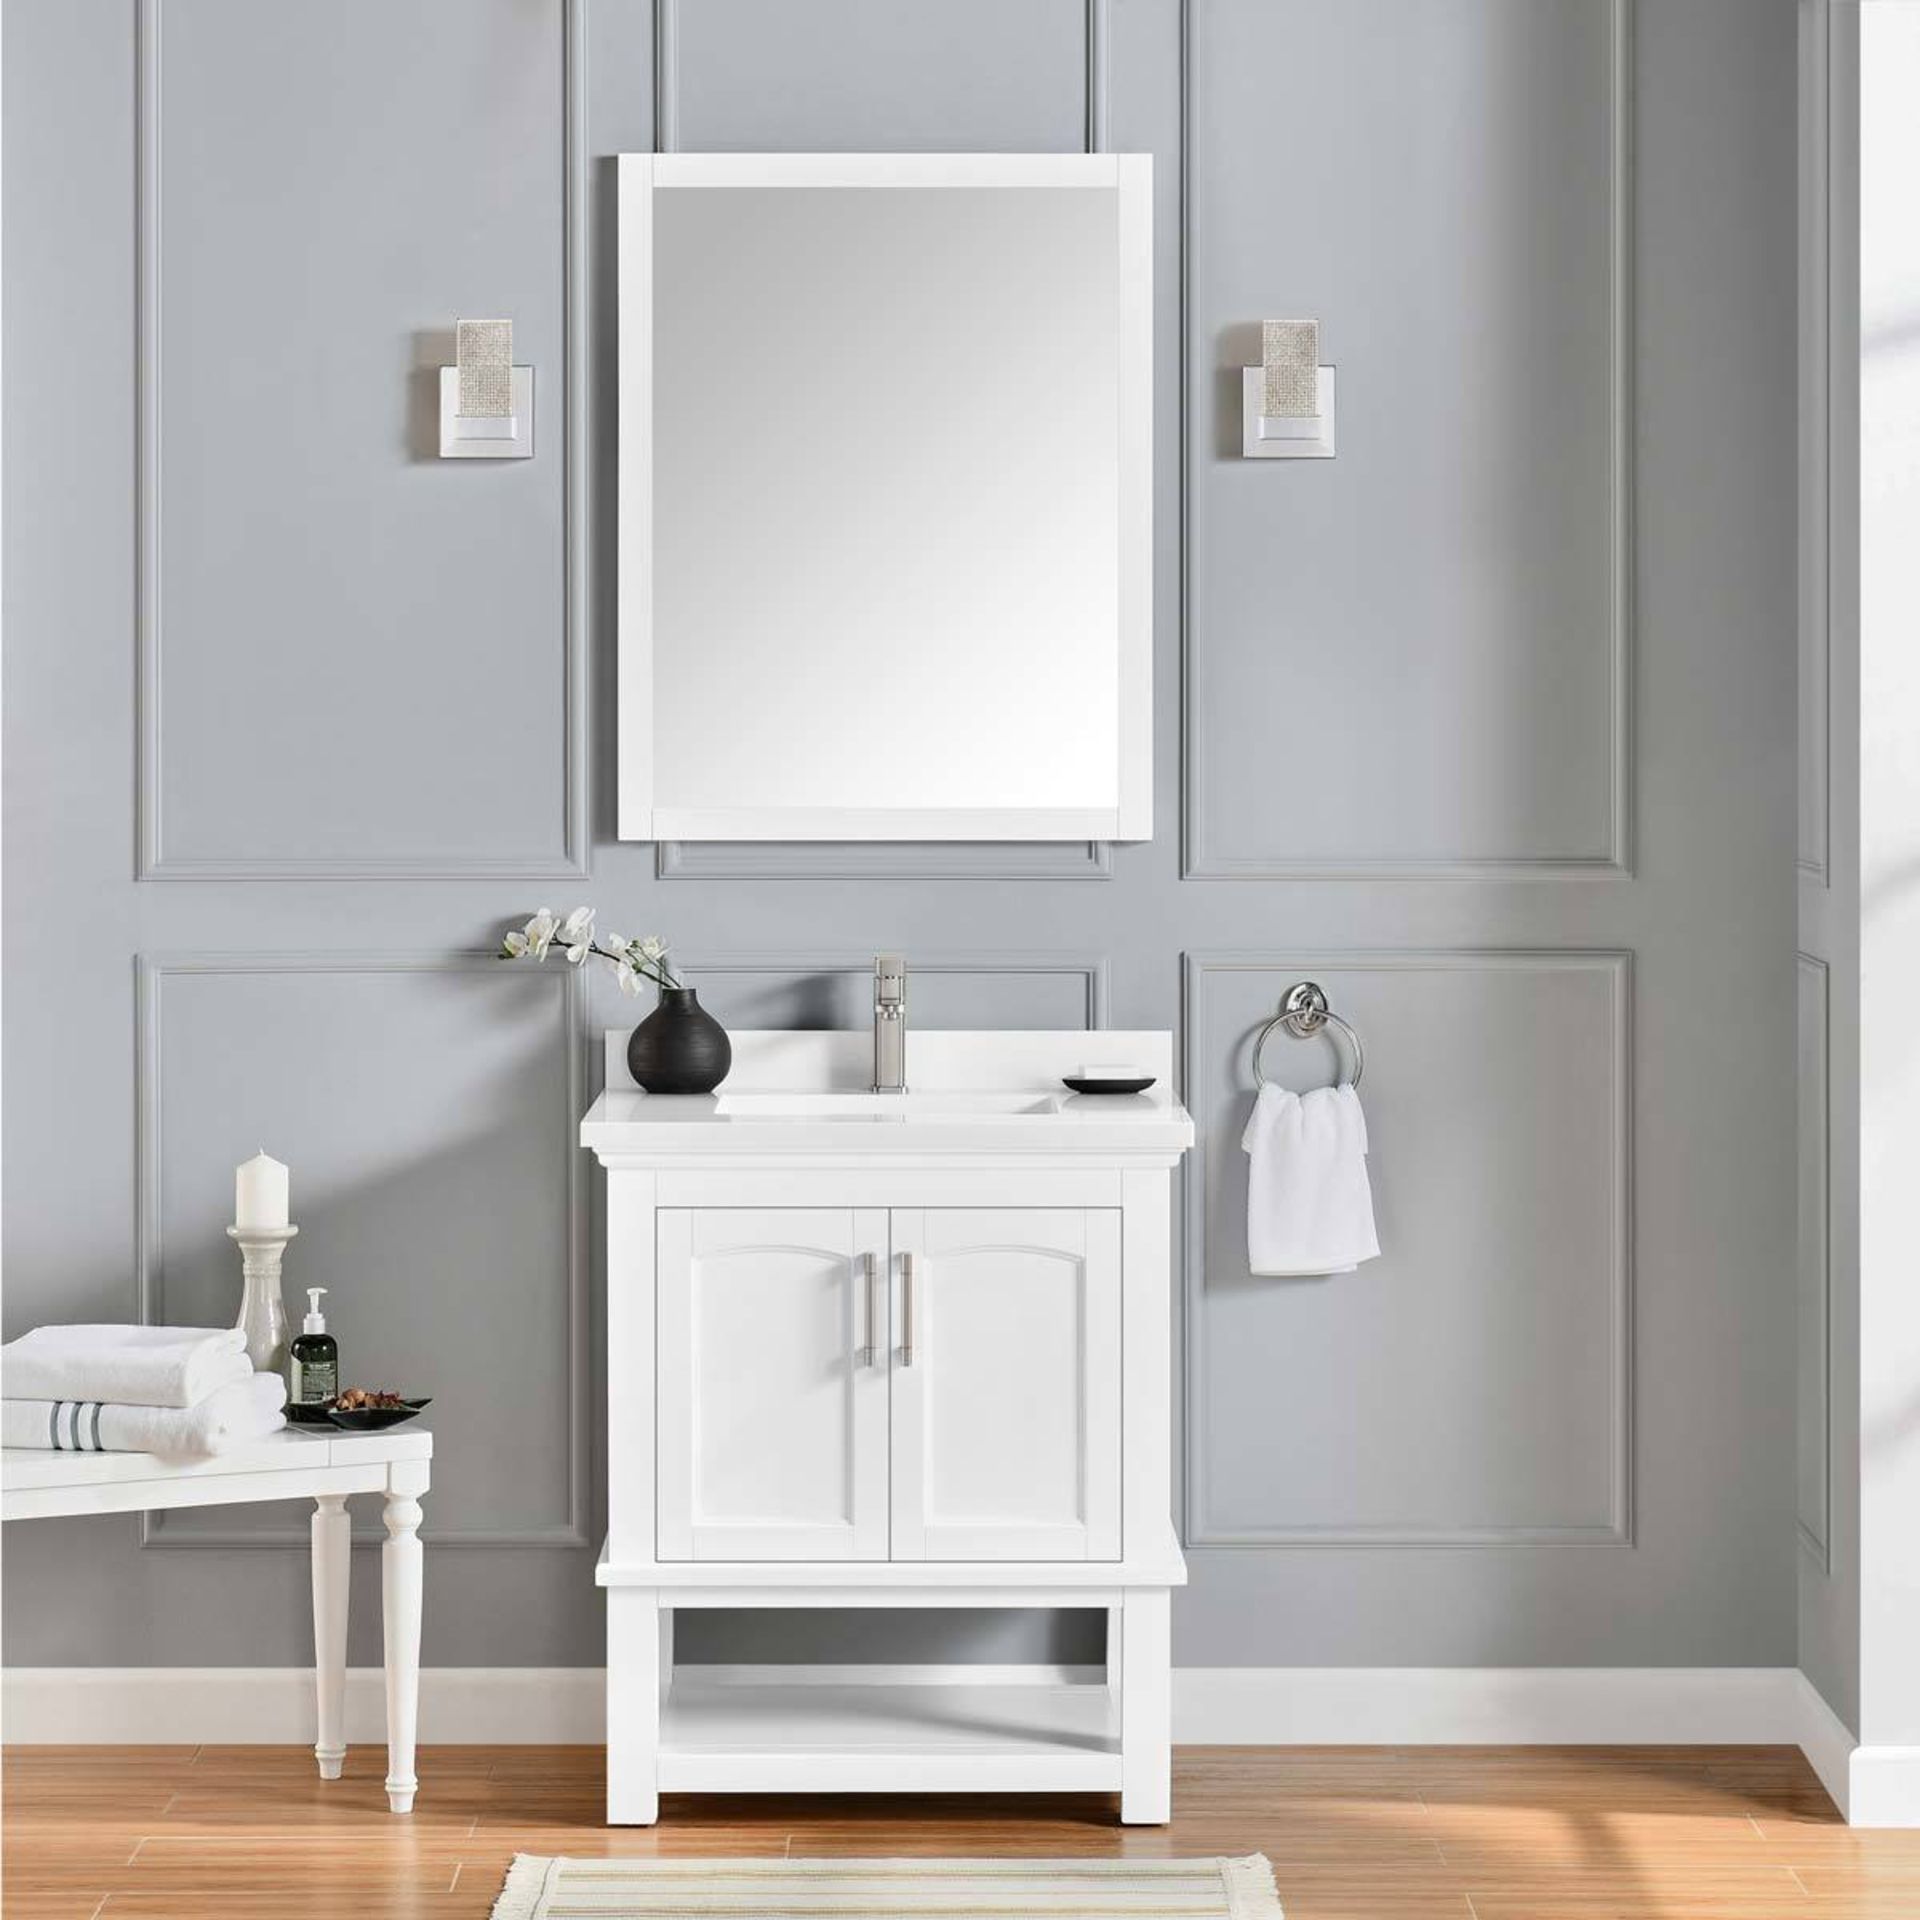 1 OVE DECORS SONIA 76CM SINGLE VANITY SINK IN WHITE RRP Â£399 (VISIBLY IN EXCELLENT CONDITION,